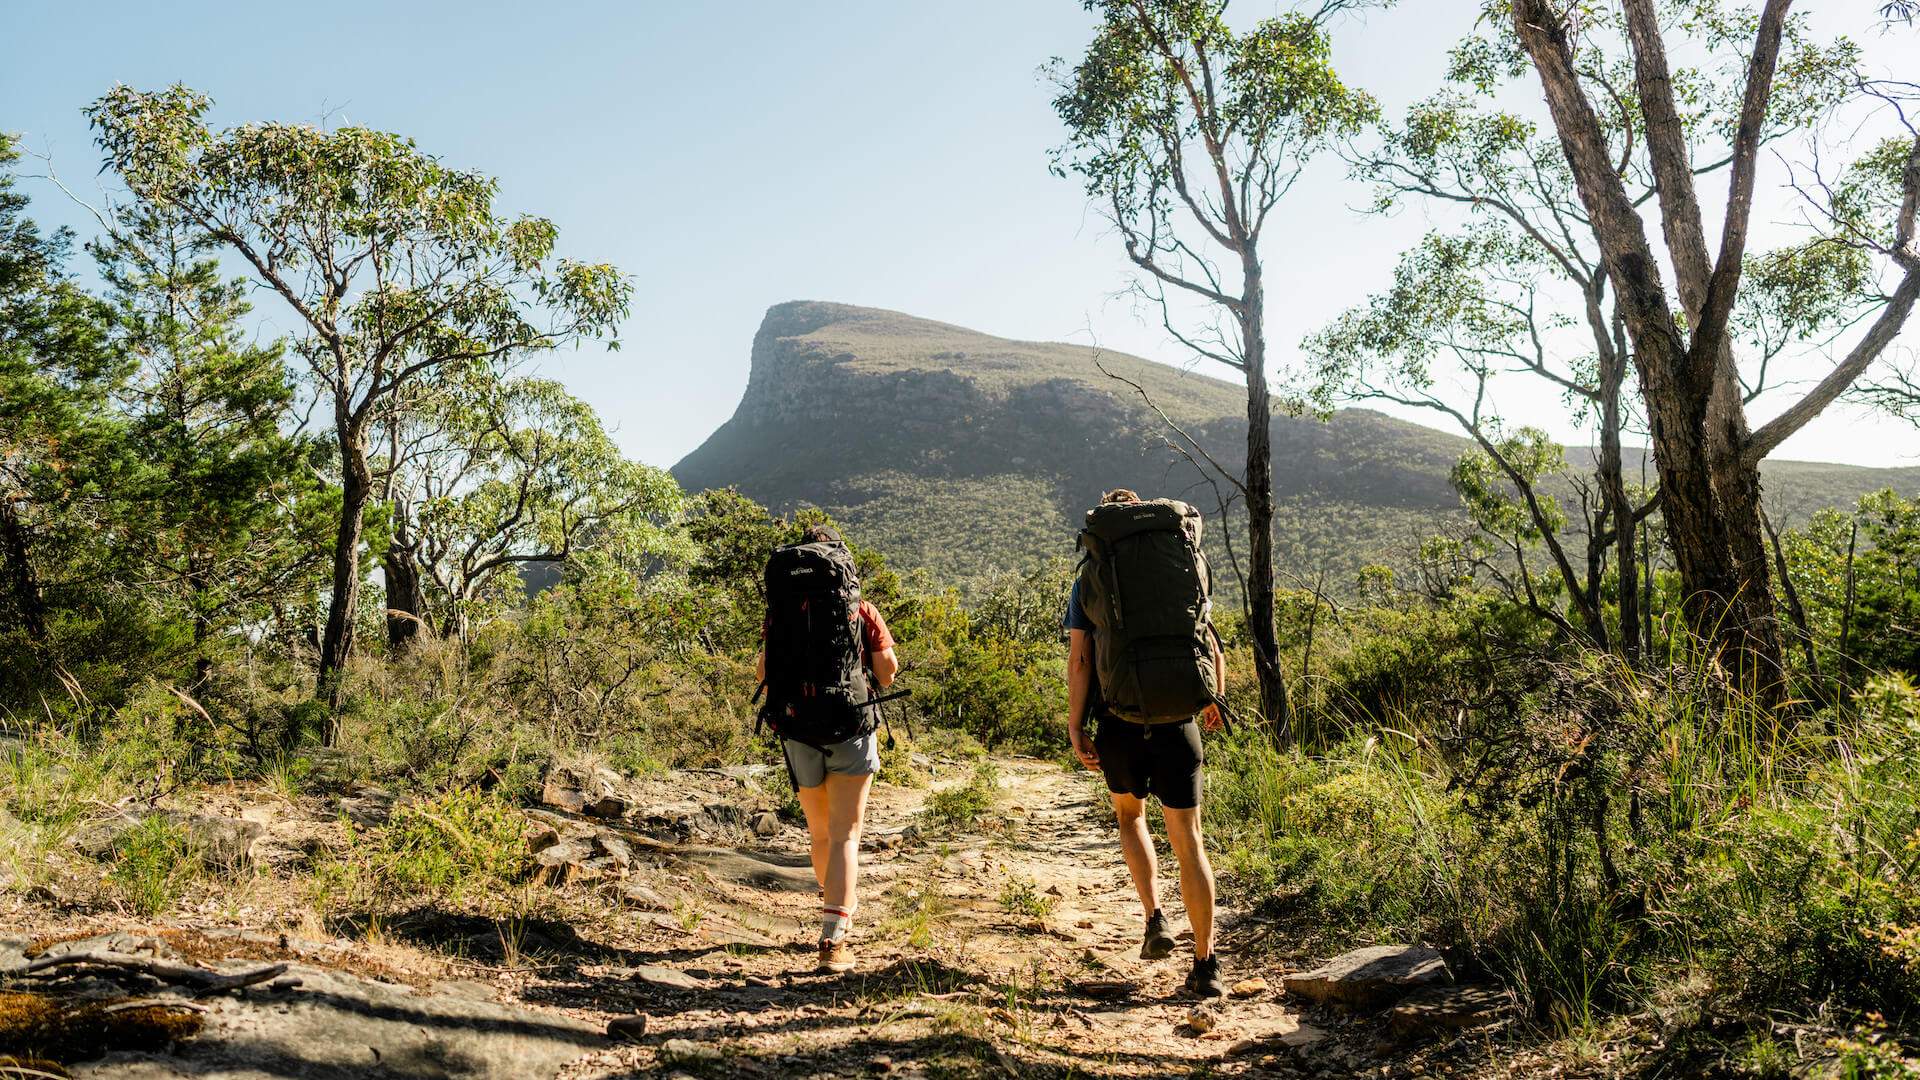 Grampians Peak Trail - one of the best multi-day hikes near Melbourne